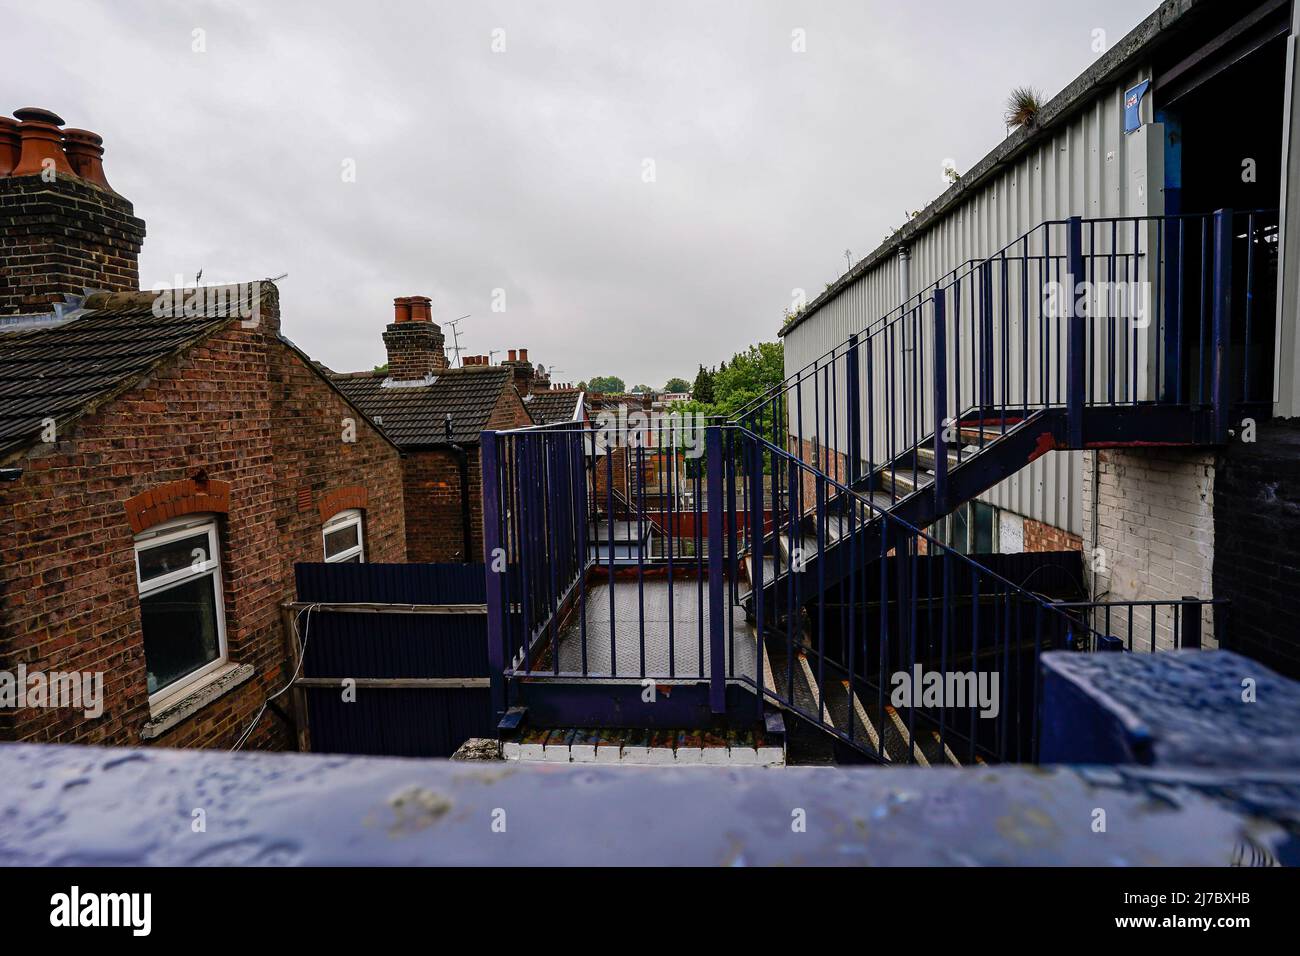 general-view-of-kenilworth-road-home-of-luton-town-ahead-of-the-sky-bet-championship-match-between-luton-town-and-reading-at-kenilworth-road-luton-england-on-7-may-2022-photo-by-david-horn-2J7BXHB.jpg